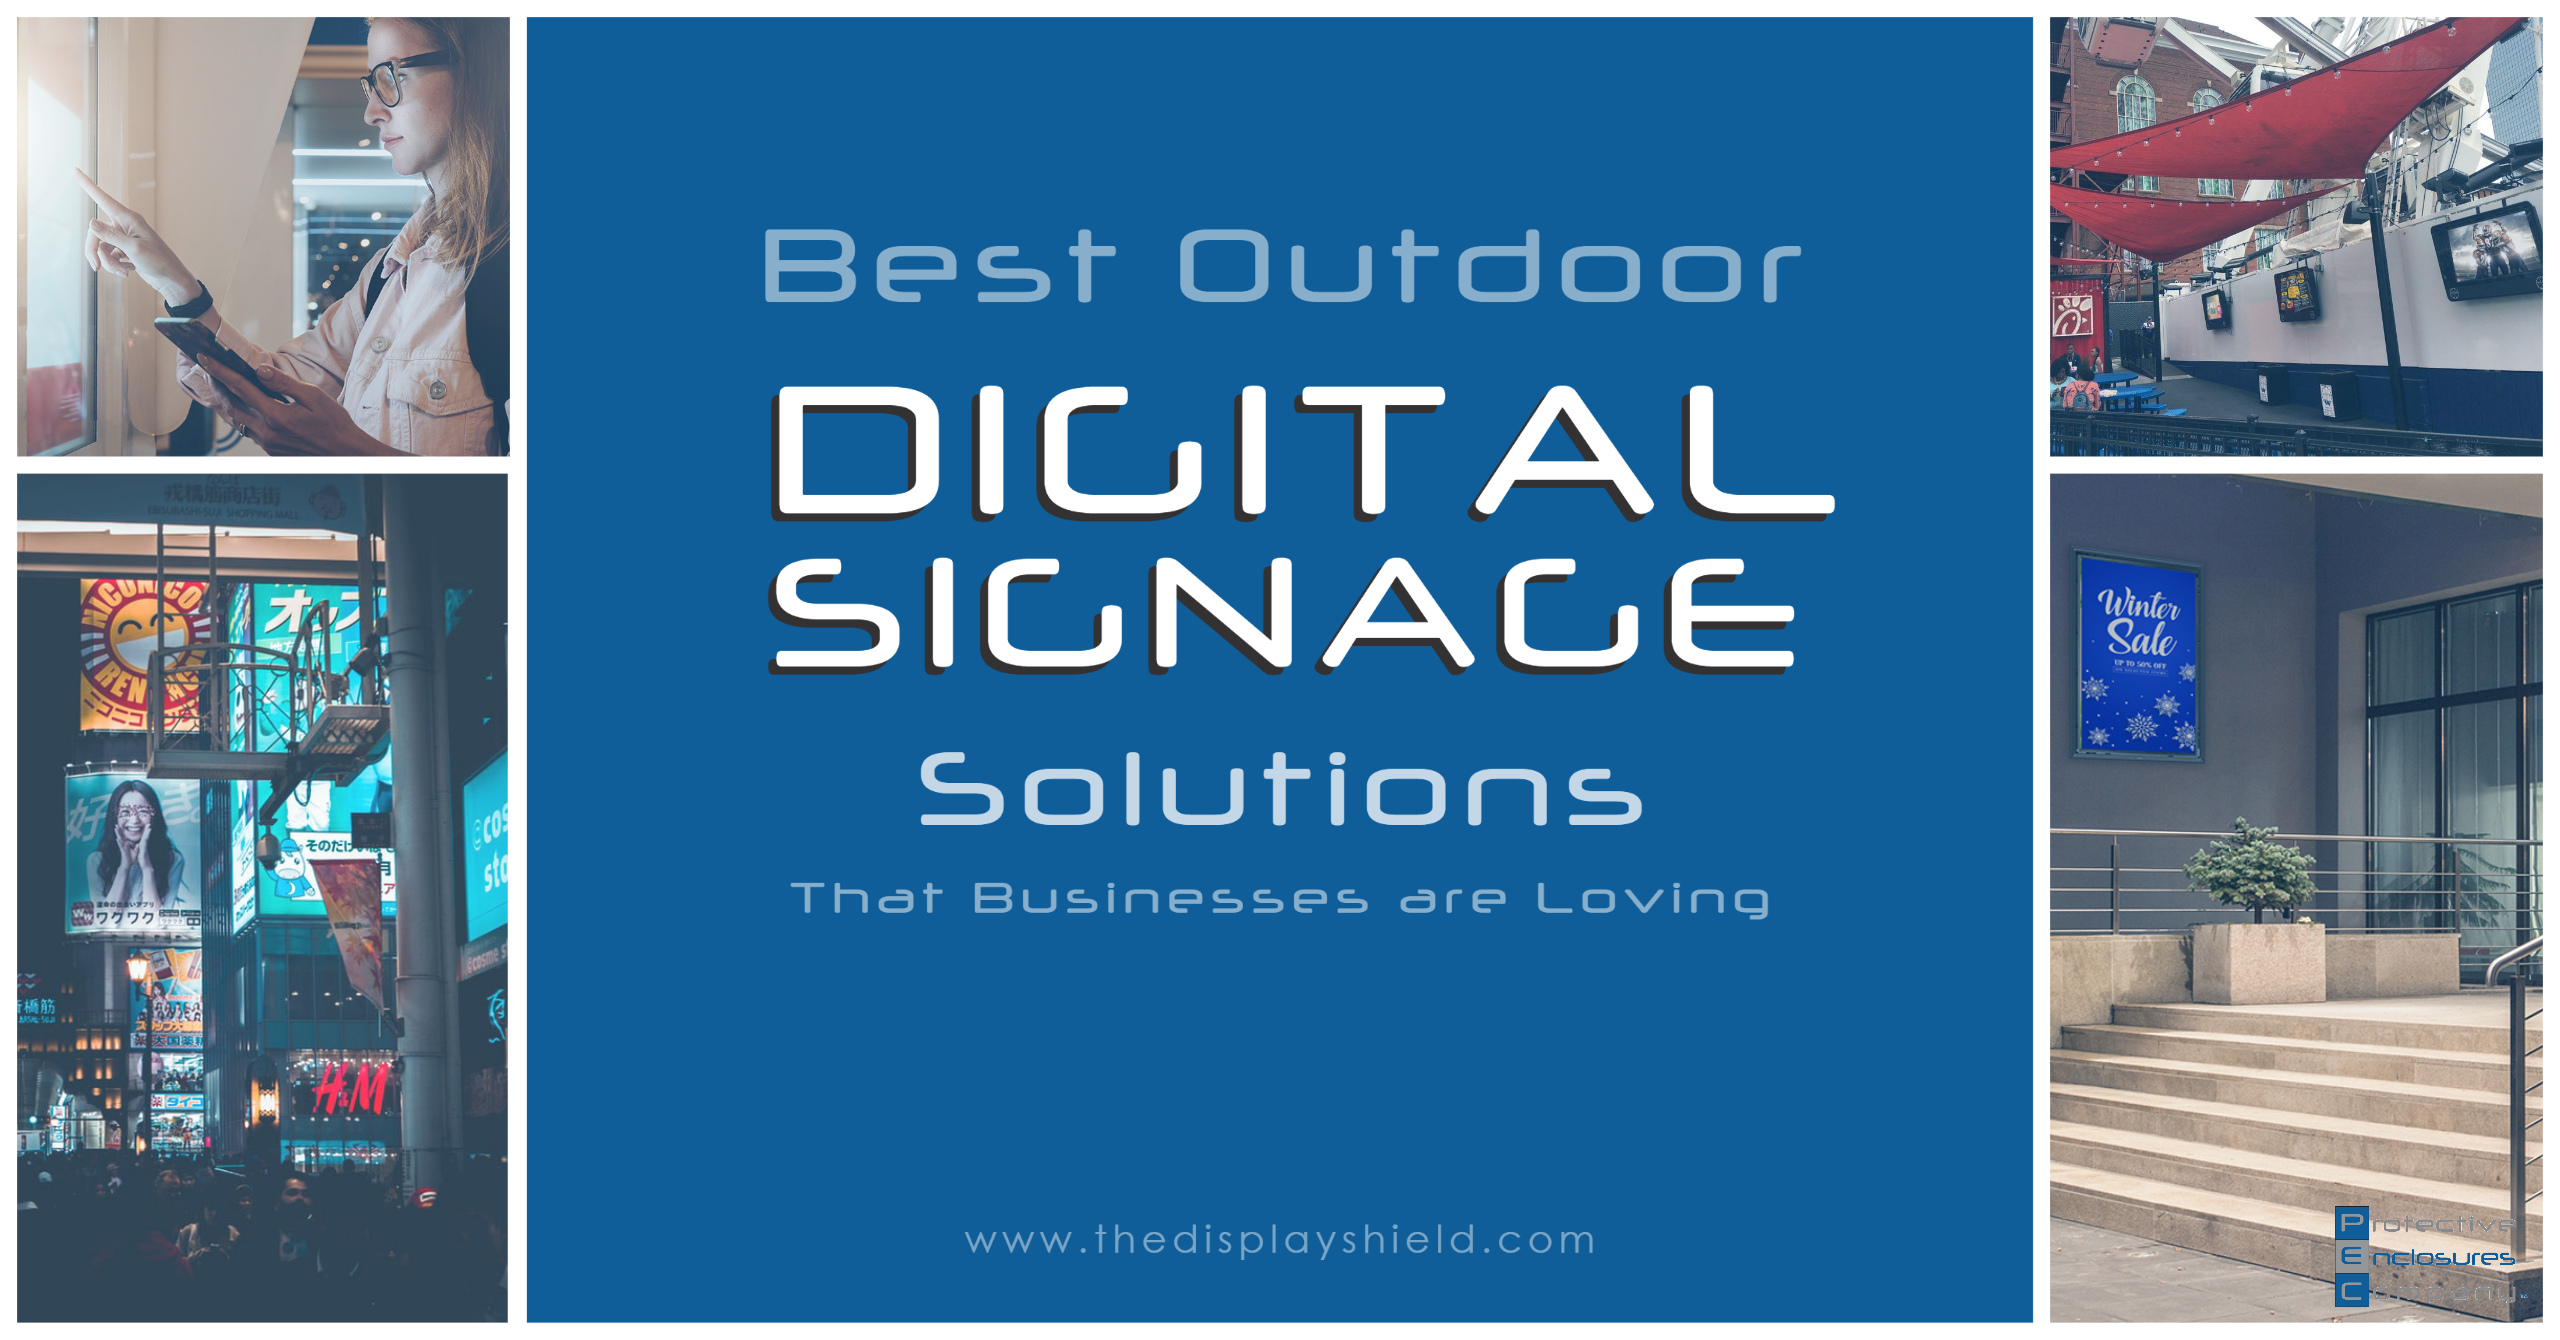 Best Outdoor Digital Signage Solutions of 2020